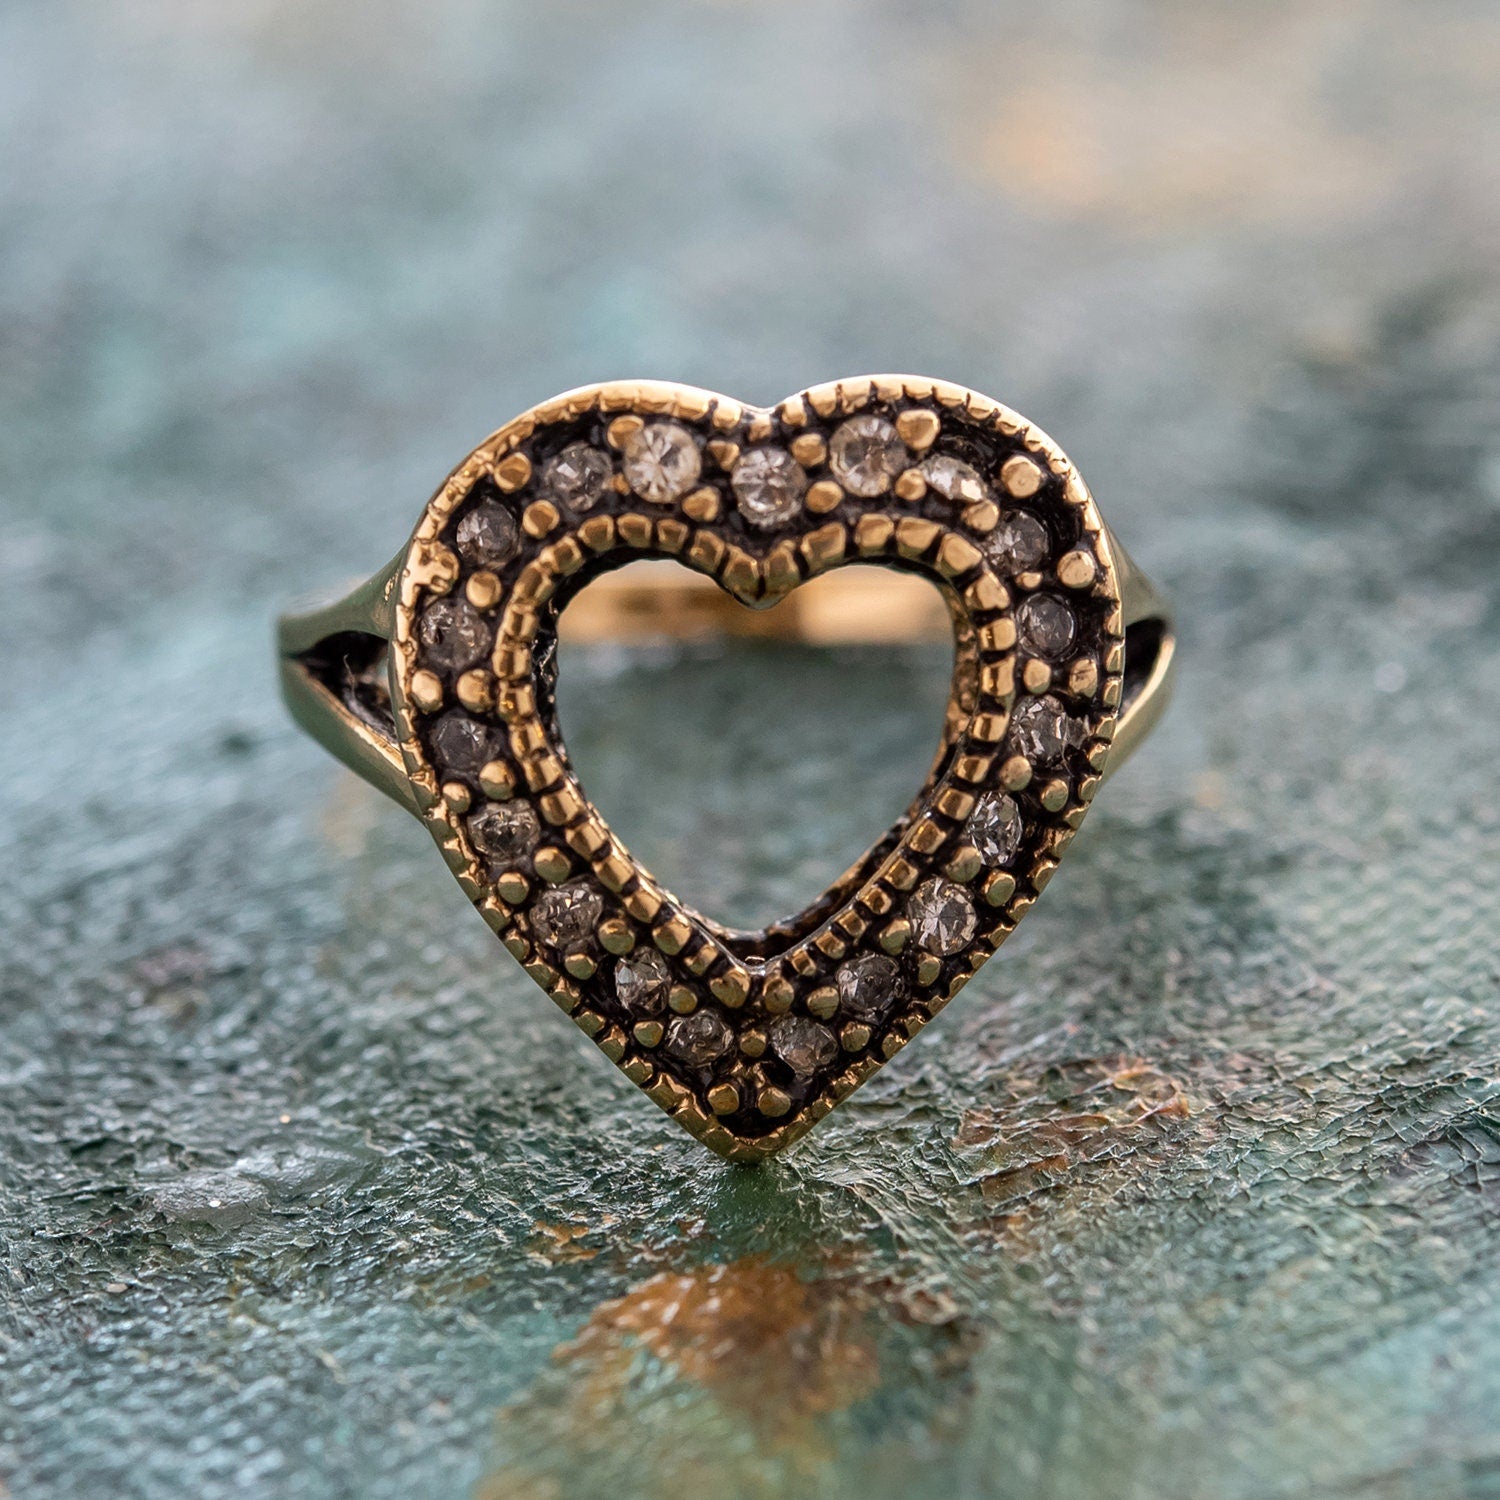 Vintage Ring Clear Swarovski Crystal Heart Ring Antique 18k Gold  R1756-CAY - Limited Stock - Never Worn